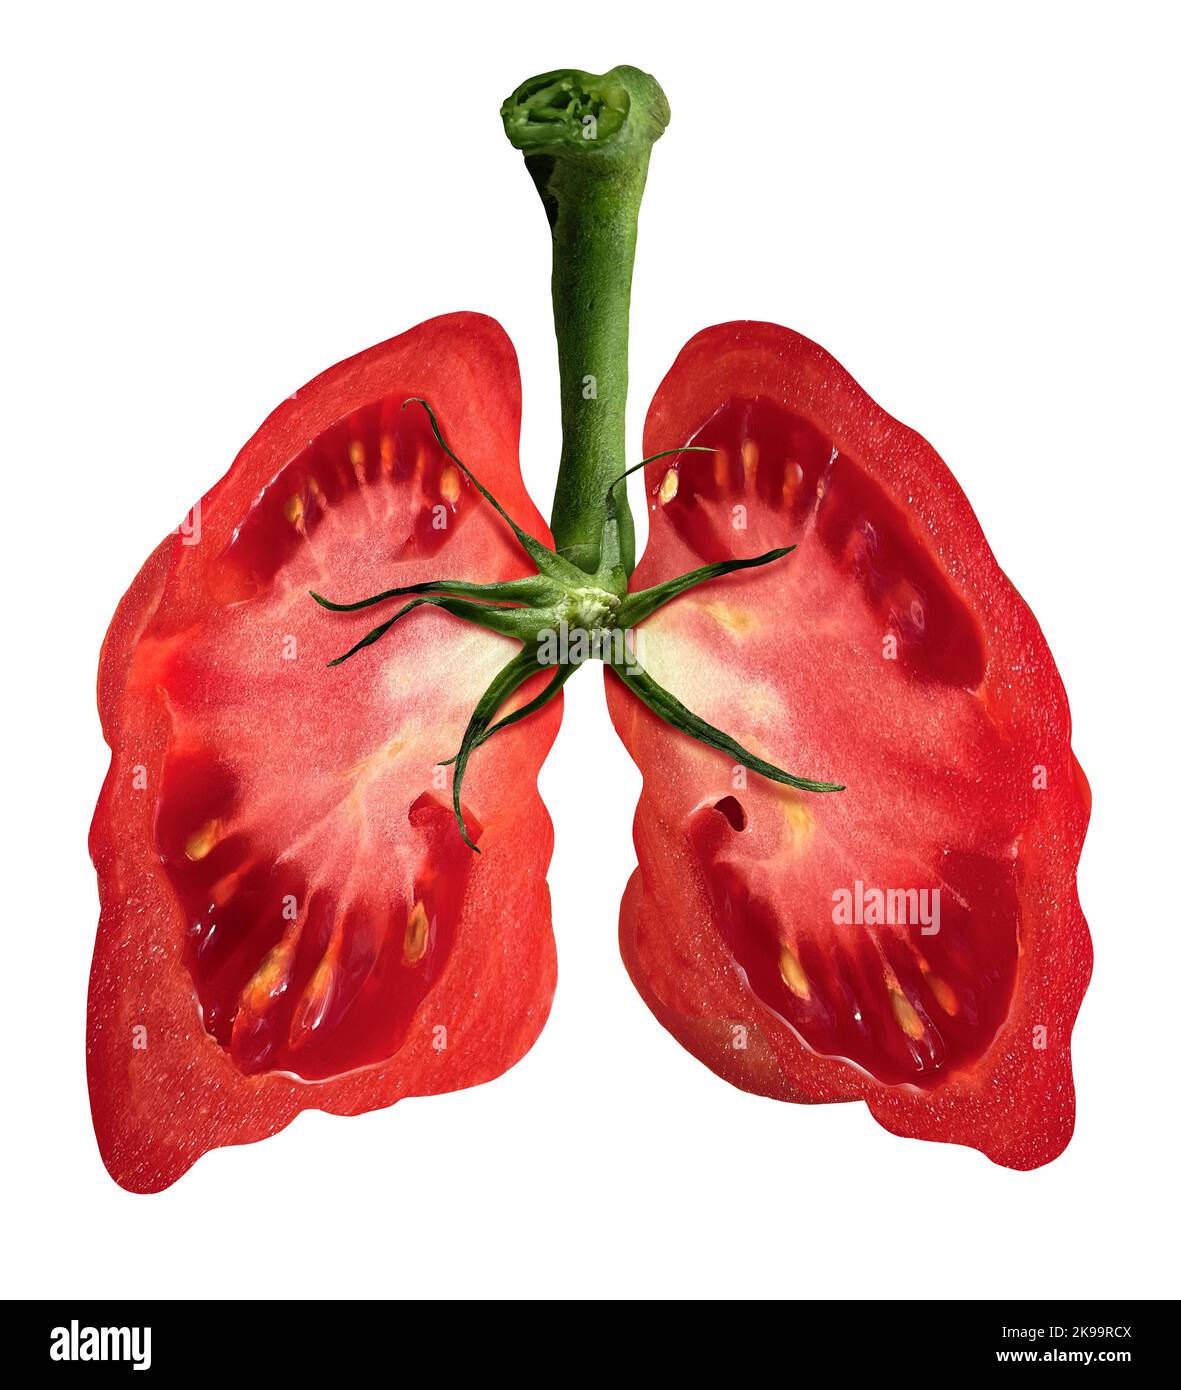 Tomatoes And Lung Health as lycopene and tomato juice dietary healthy food to fight pulmonary disease and COPD as a medicinal diet and nutrition. Stock Photo